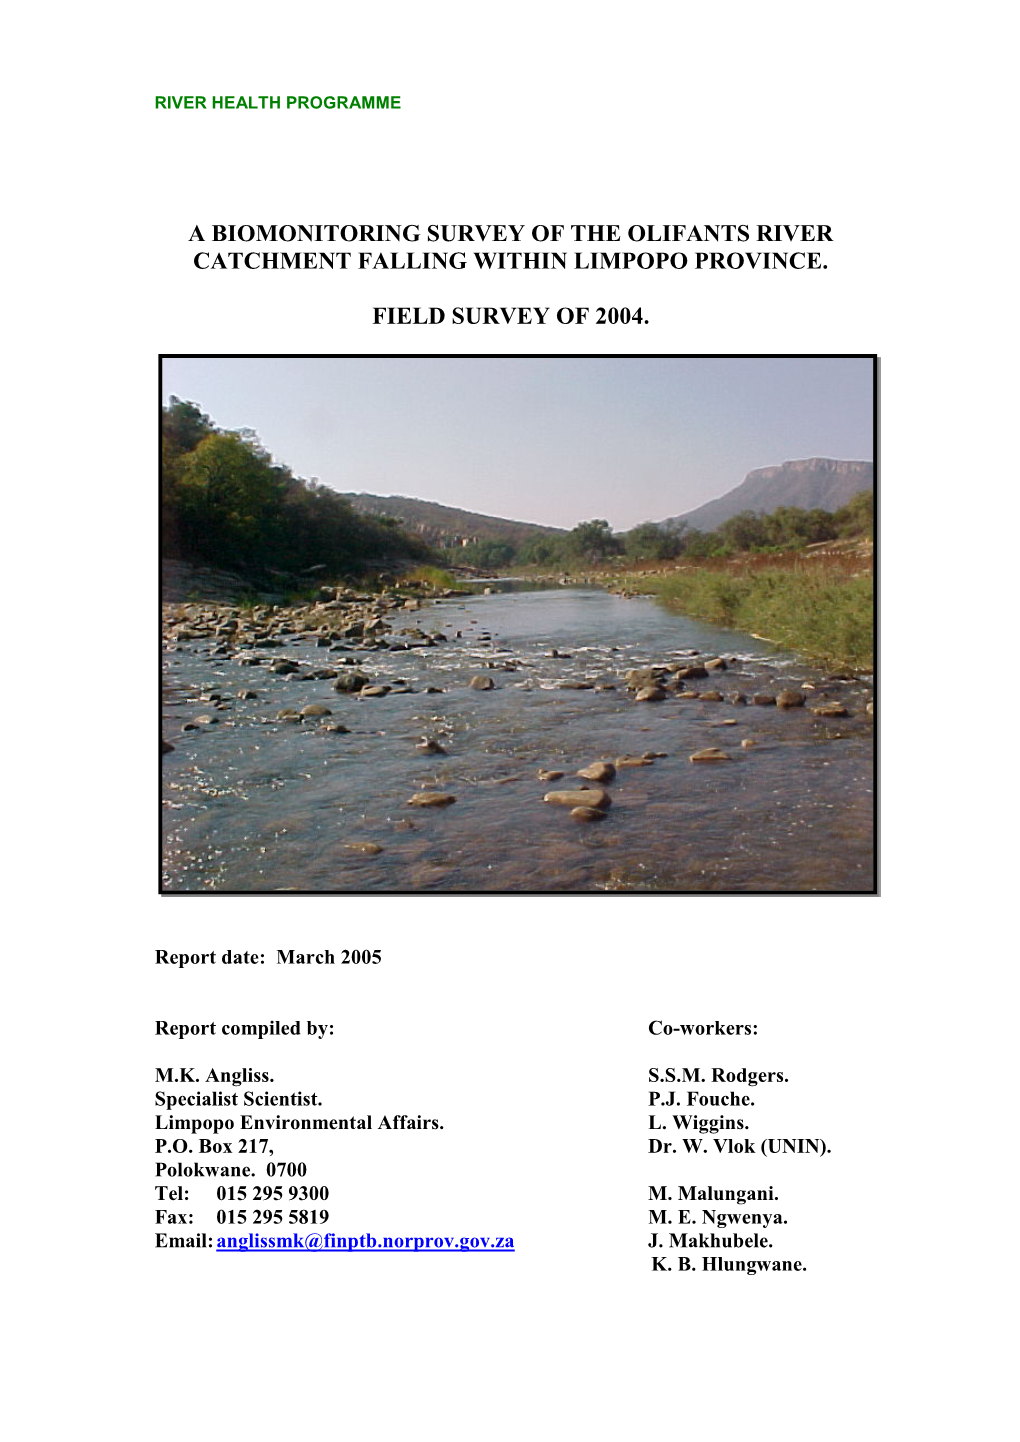 A Biomonitoring Survey of the Olifants River Catchment Falling Within Limpopo Province